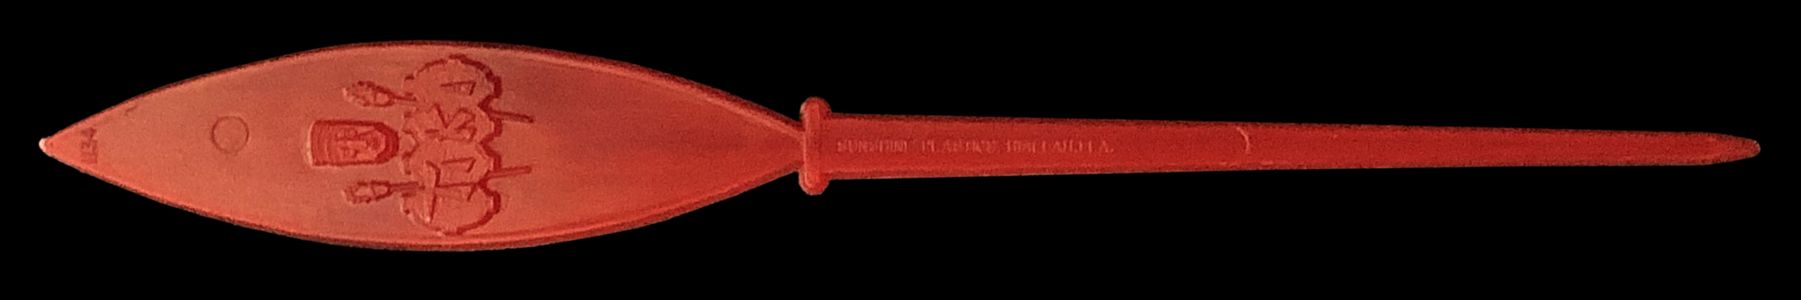 Polynesian Room Paddle Pick Red F